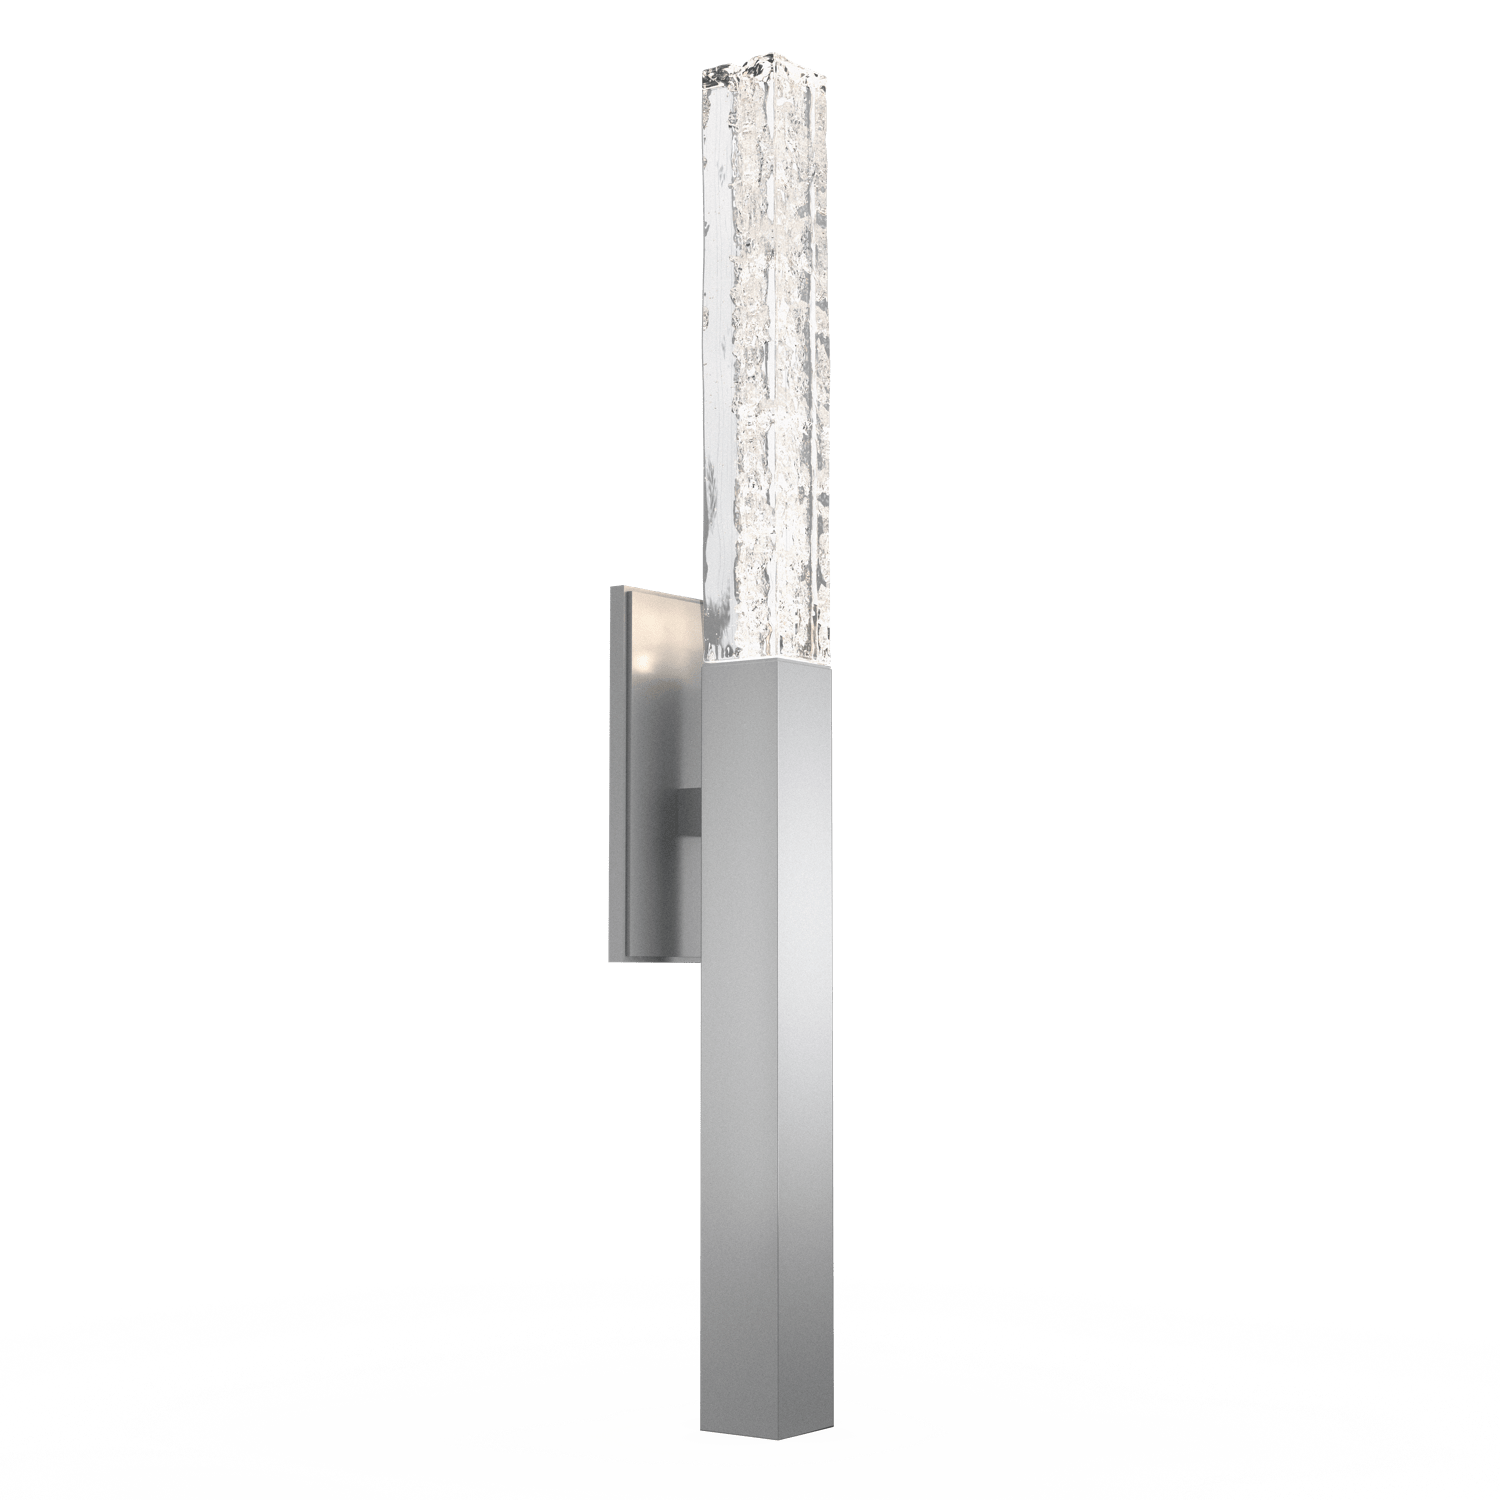 IDB0060-26-CS-GC-Hammerton-Studio-Axis-Indoor-Sconce-with-Classic-Silver-finish-and-clear-cast-glass-and-LED-lamping